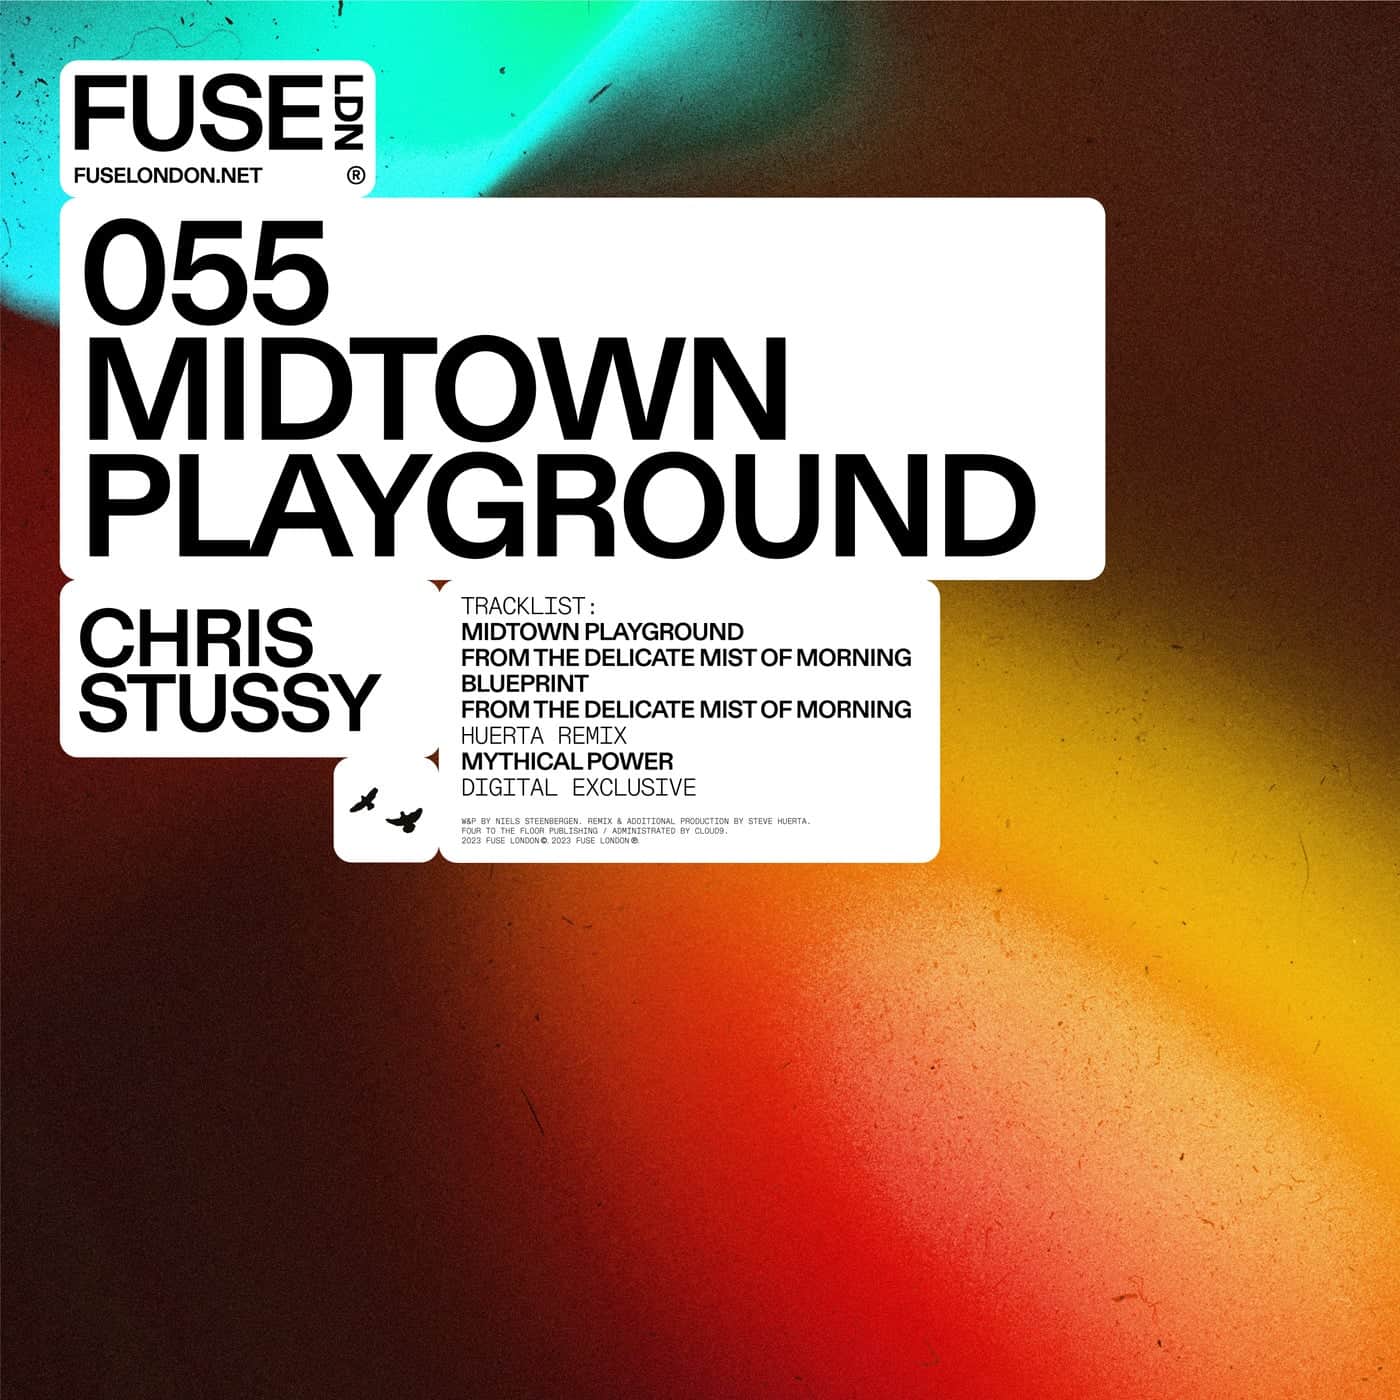 image cover: Midtown Playground EP by Chris Stussy on Fuse London